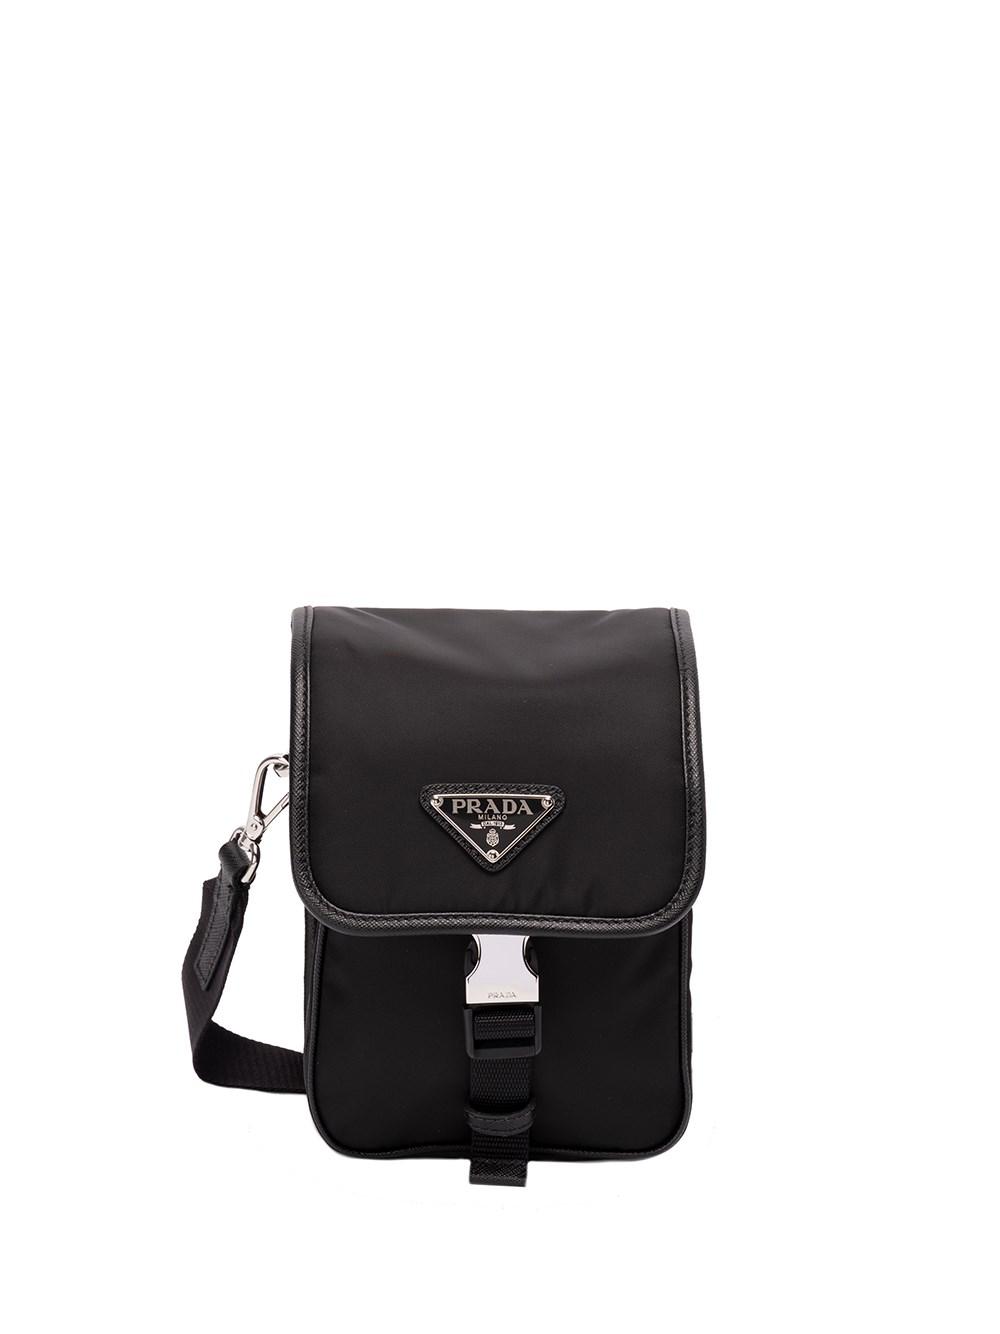 Prada `re-nylon` And Saffiano Leather Shoulder Bag in Black for